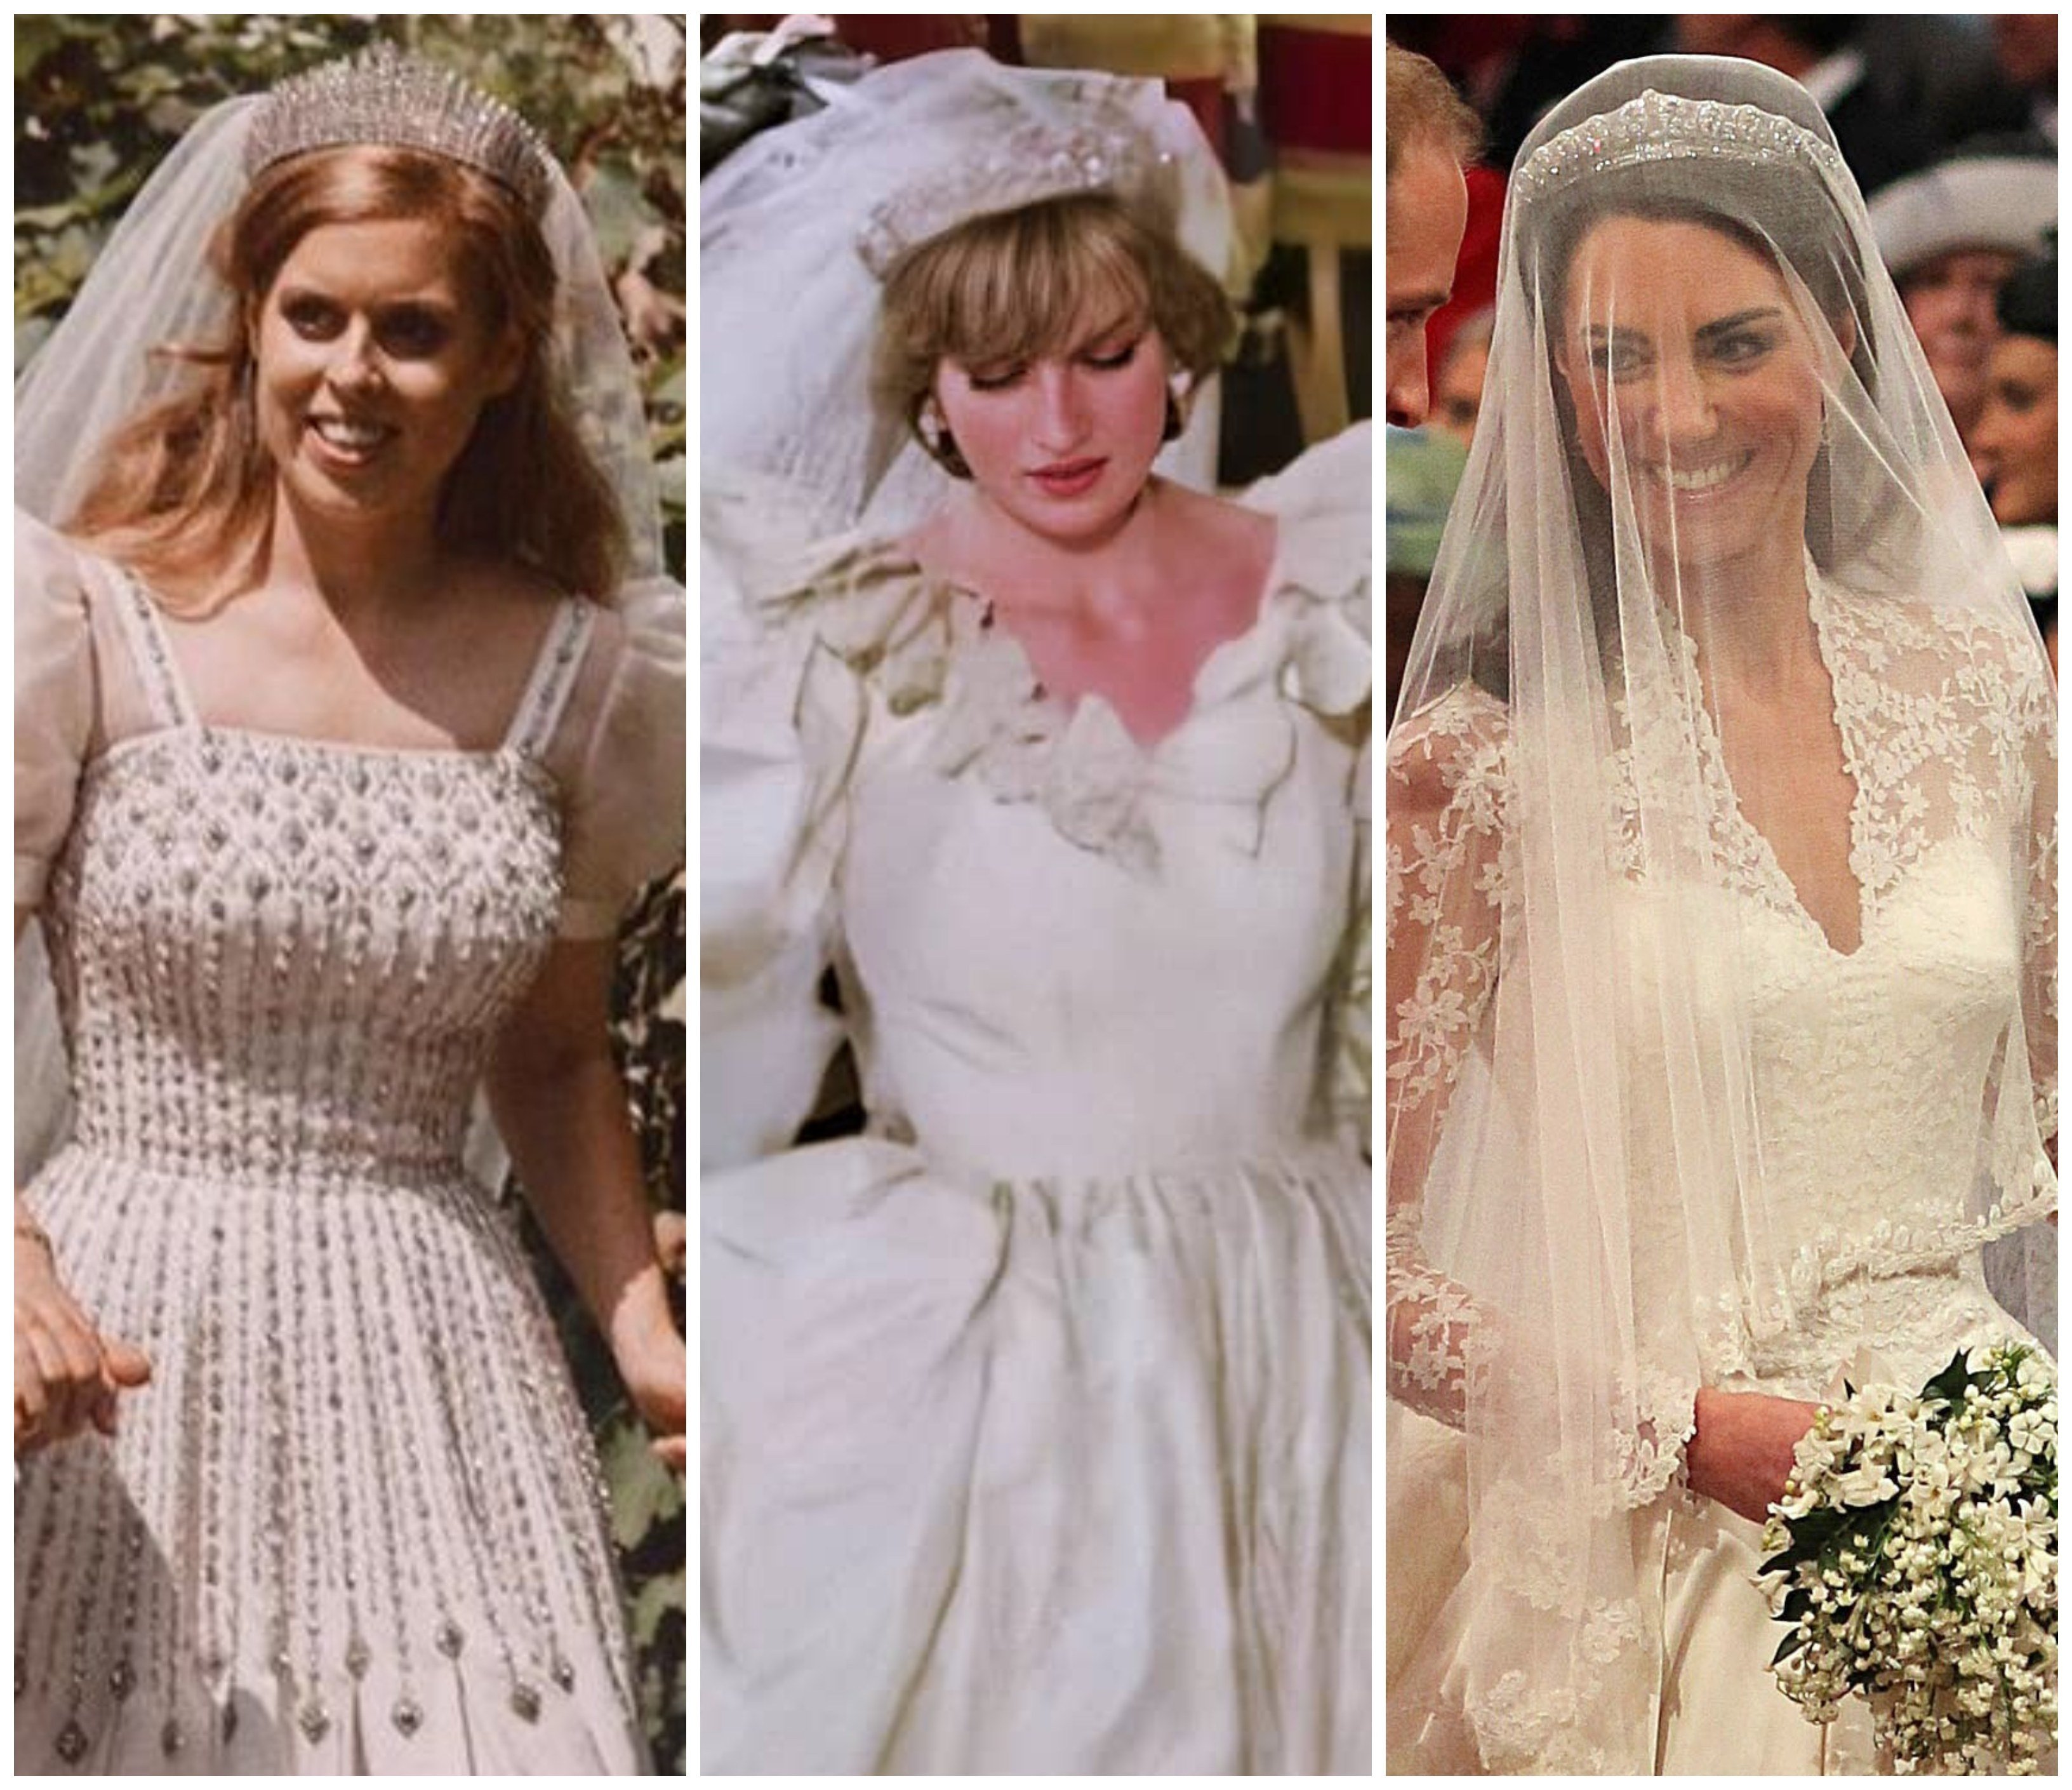 Between Princess Beatrice, Princess Diana and Kate Middleton, which British royal had the best wedding dress? Photos: @edomapellimozzi, @theprincesschronicle/Instagram, Reuters